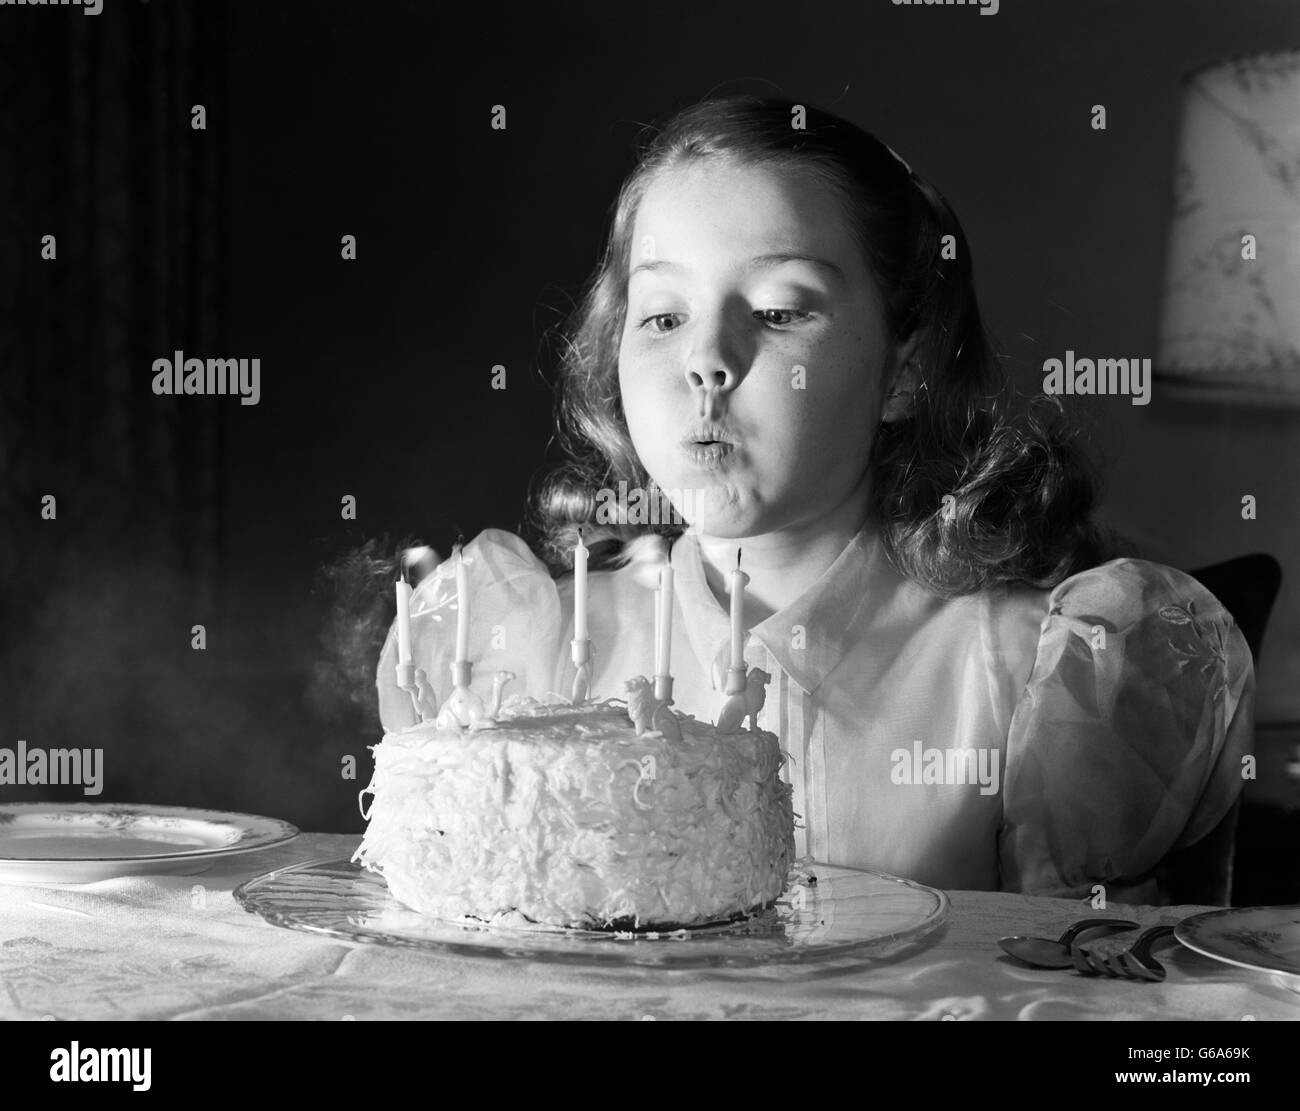 1950 GIRL IN PARTY DRESS BLOWING OUT CANDLES ON CAKE AVEC 5 BOUGIES Banque D'Images